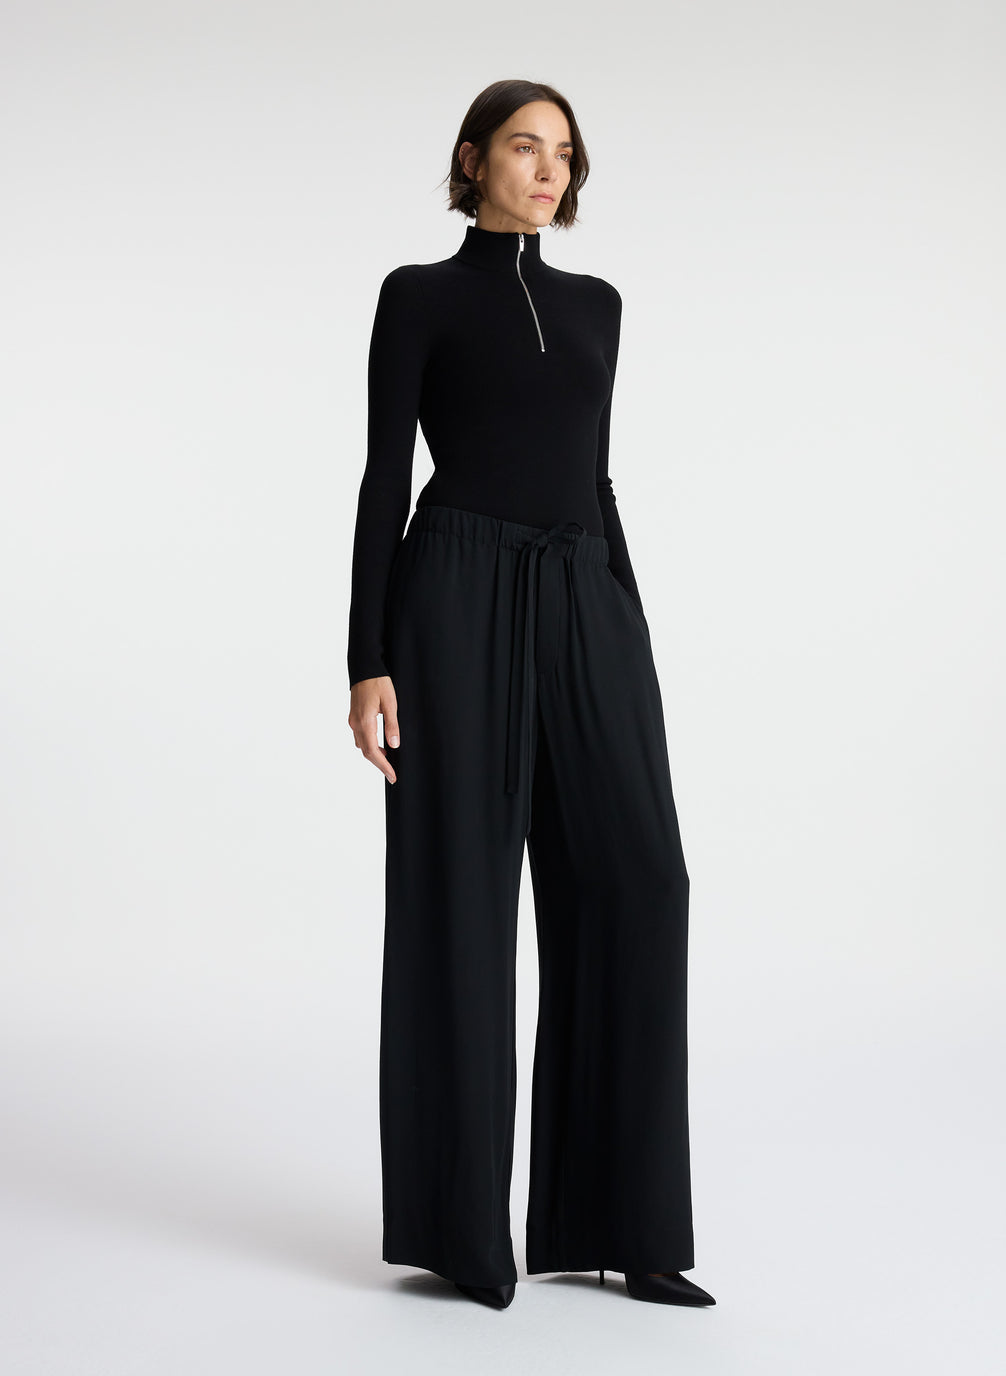 side view of woman wearing black knit top and black wide leg pants